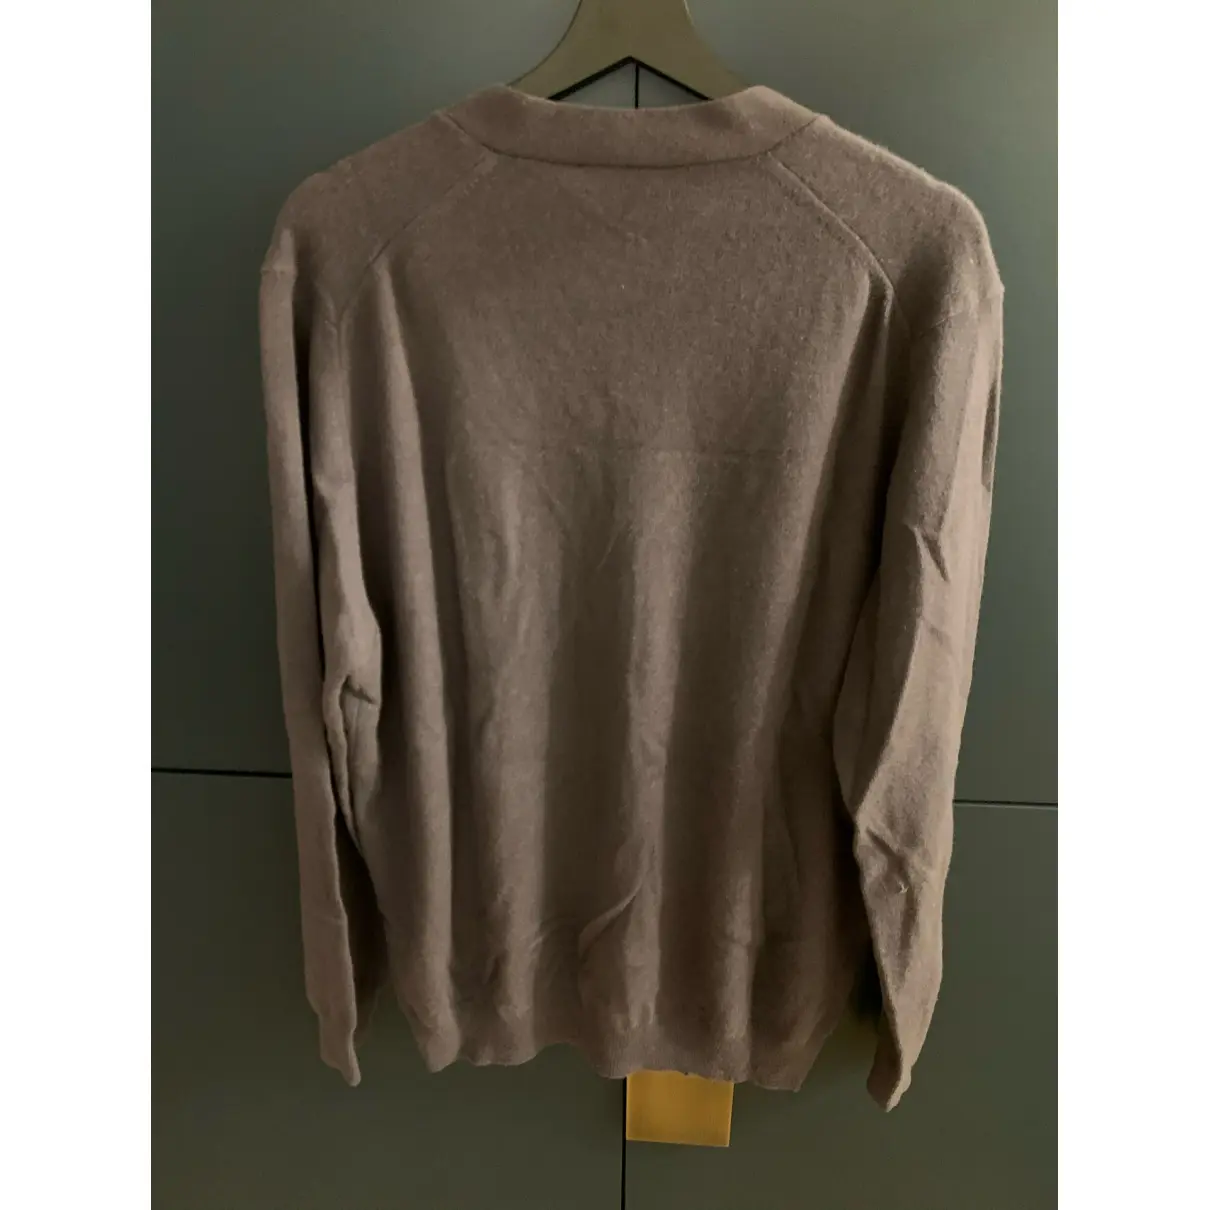 Buy Paul Smith Cashmere pull online